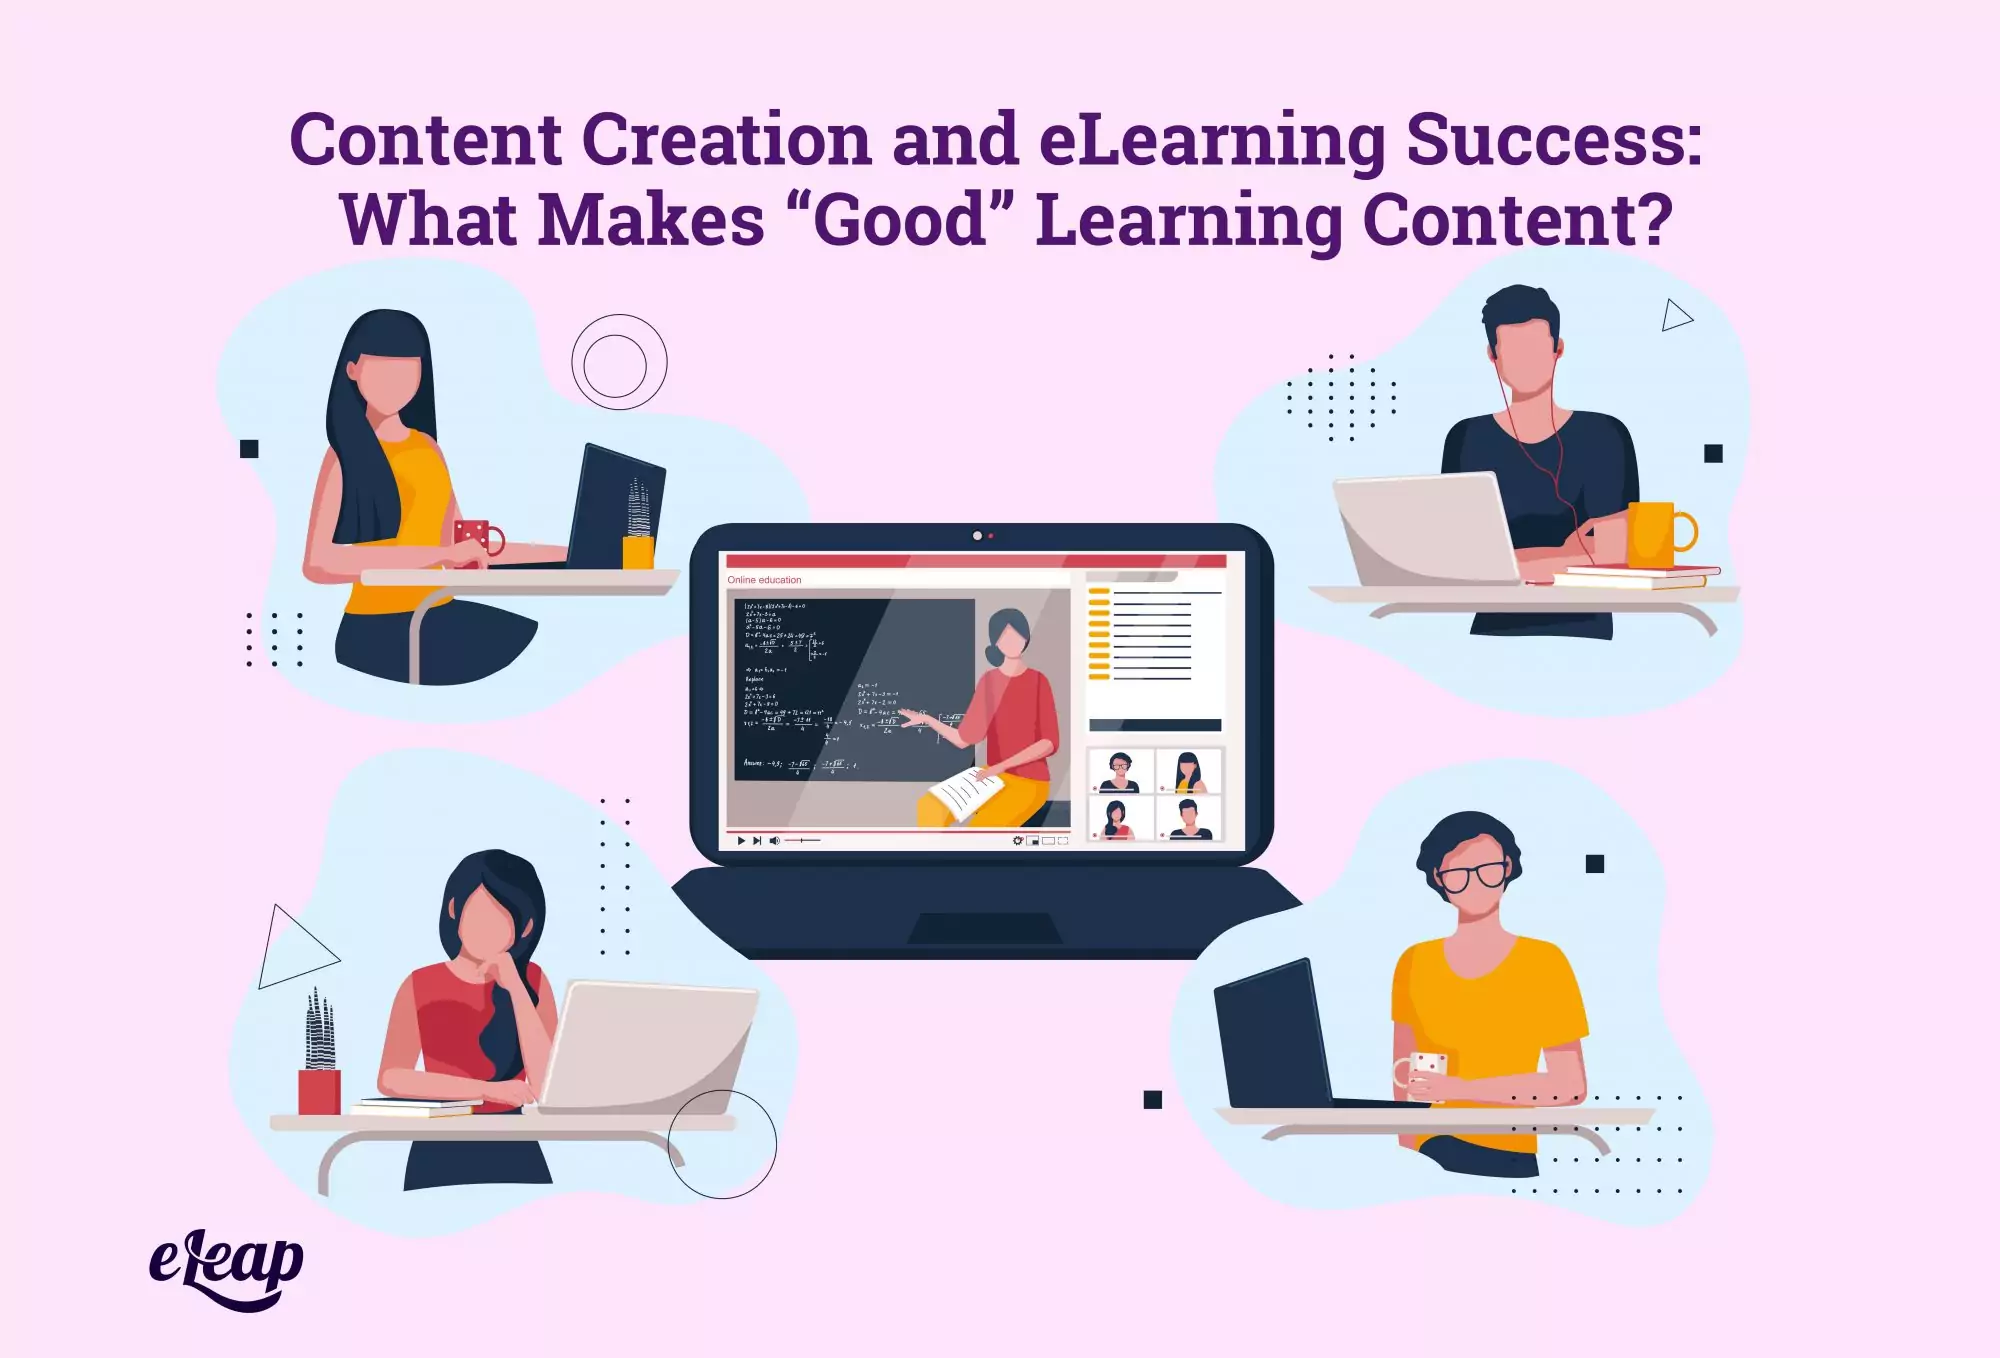 Content Creation and eLearning Success: What Makes “Good” Learning Content?